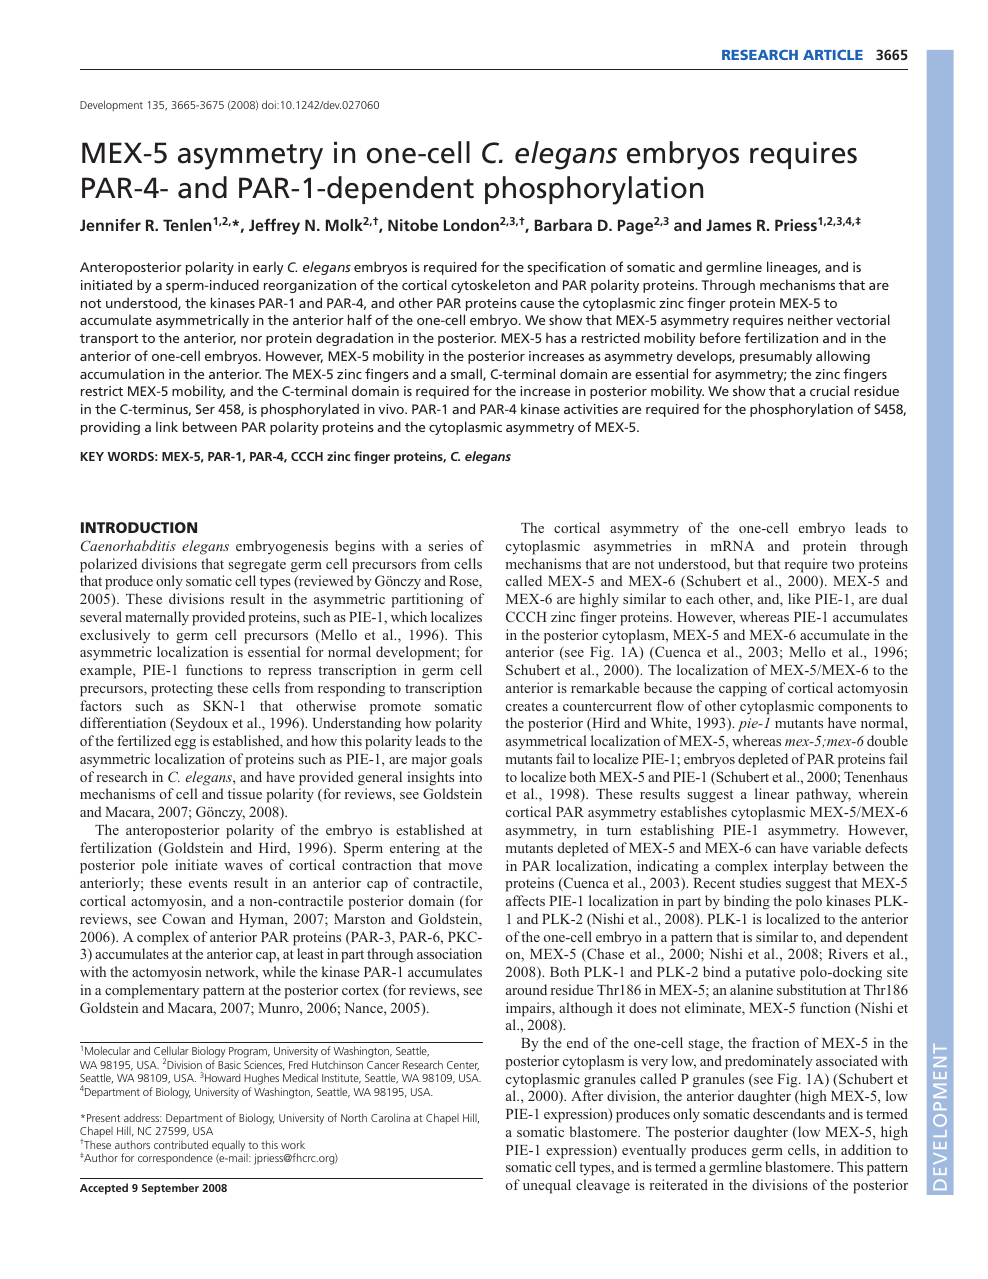 Mex 5 Asymmetry In One Cell C Elegans Embryos Requires Par 4 And Par 1 Dependent Phosphorylation Topic Of Research Paper In Biological Sciences Download Scholarly Article Pdf And Read For Free On Cyberleninka Open Science